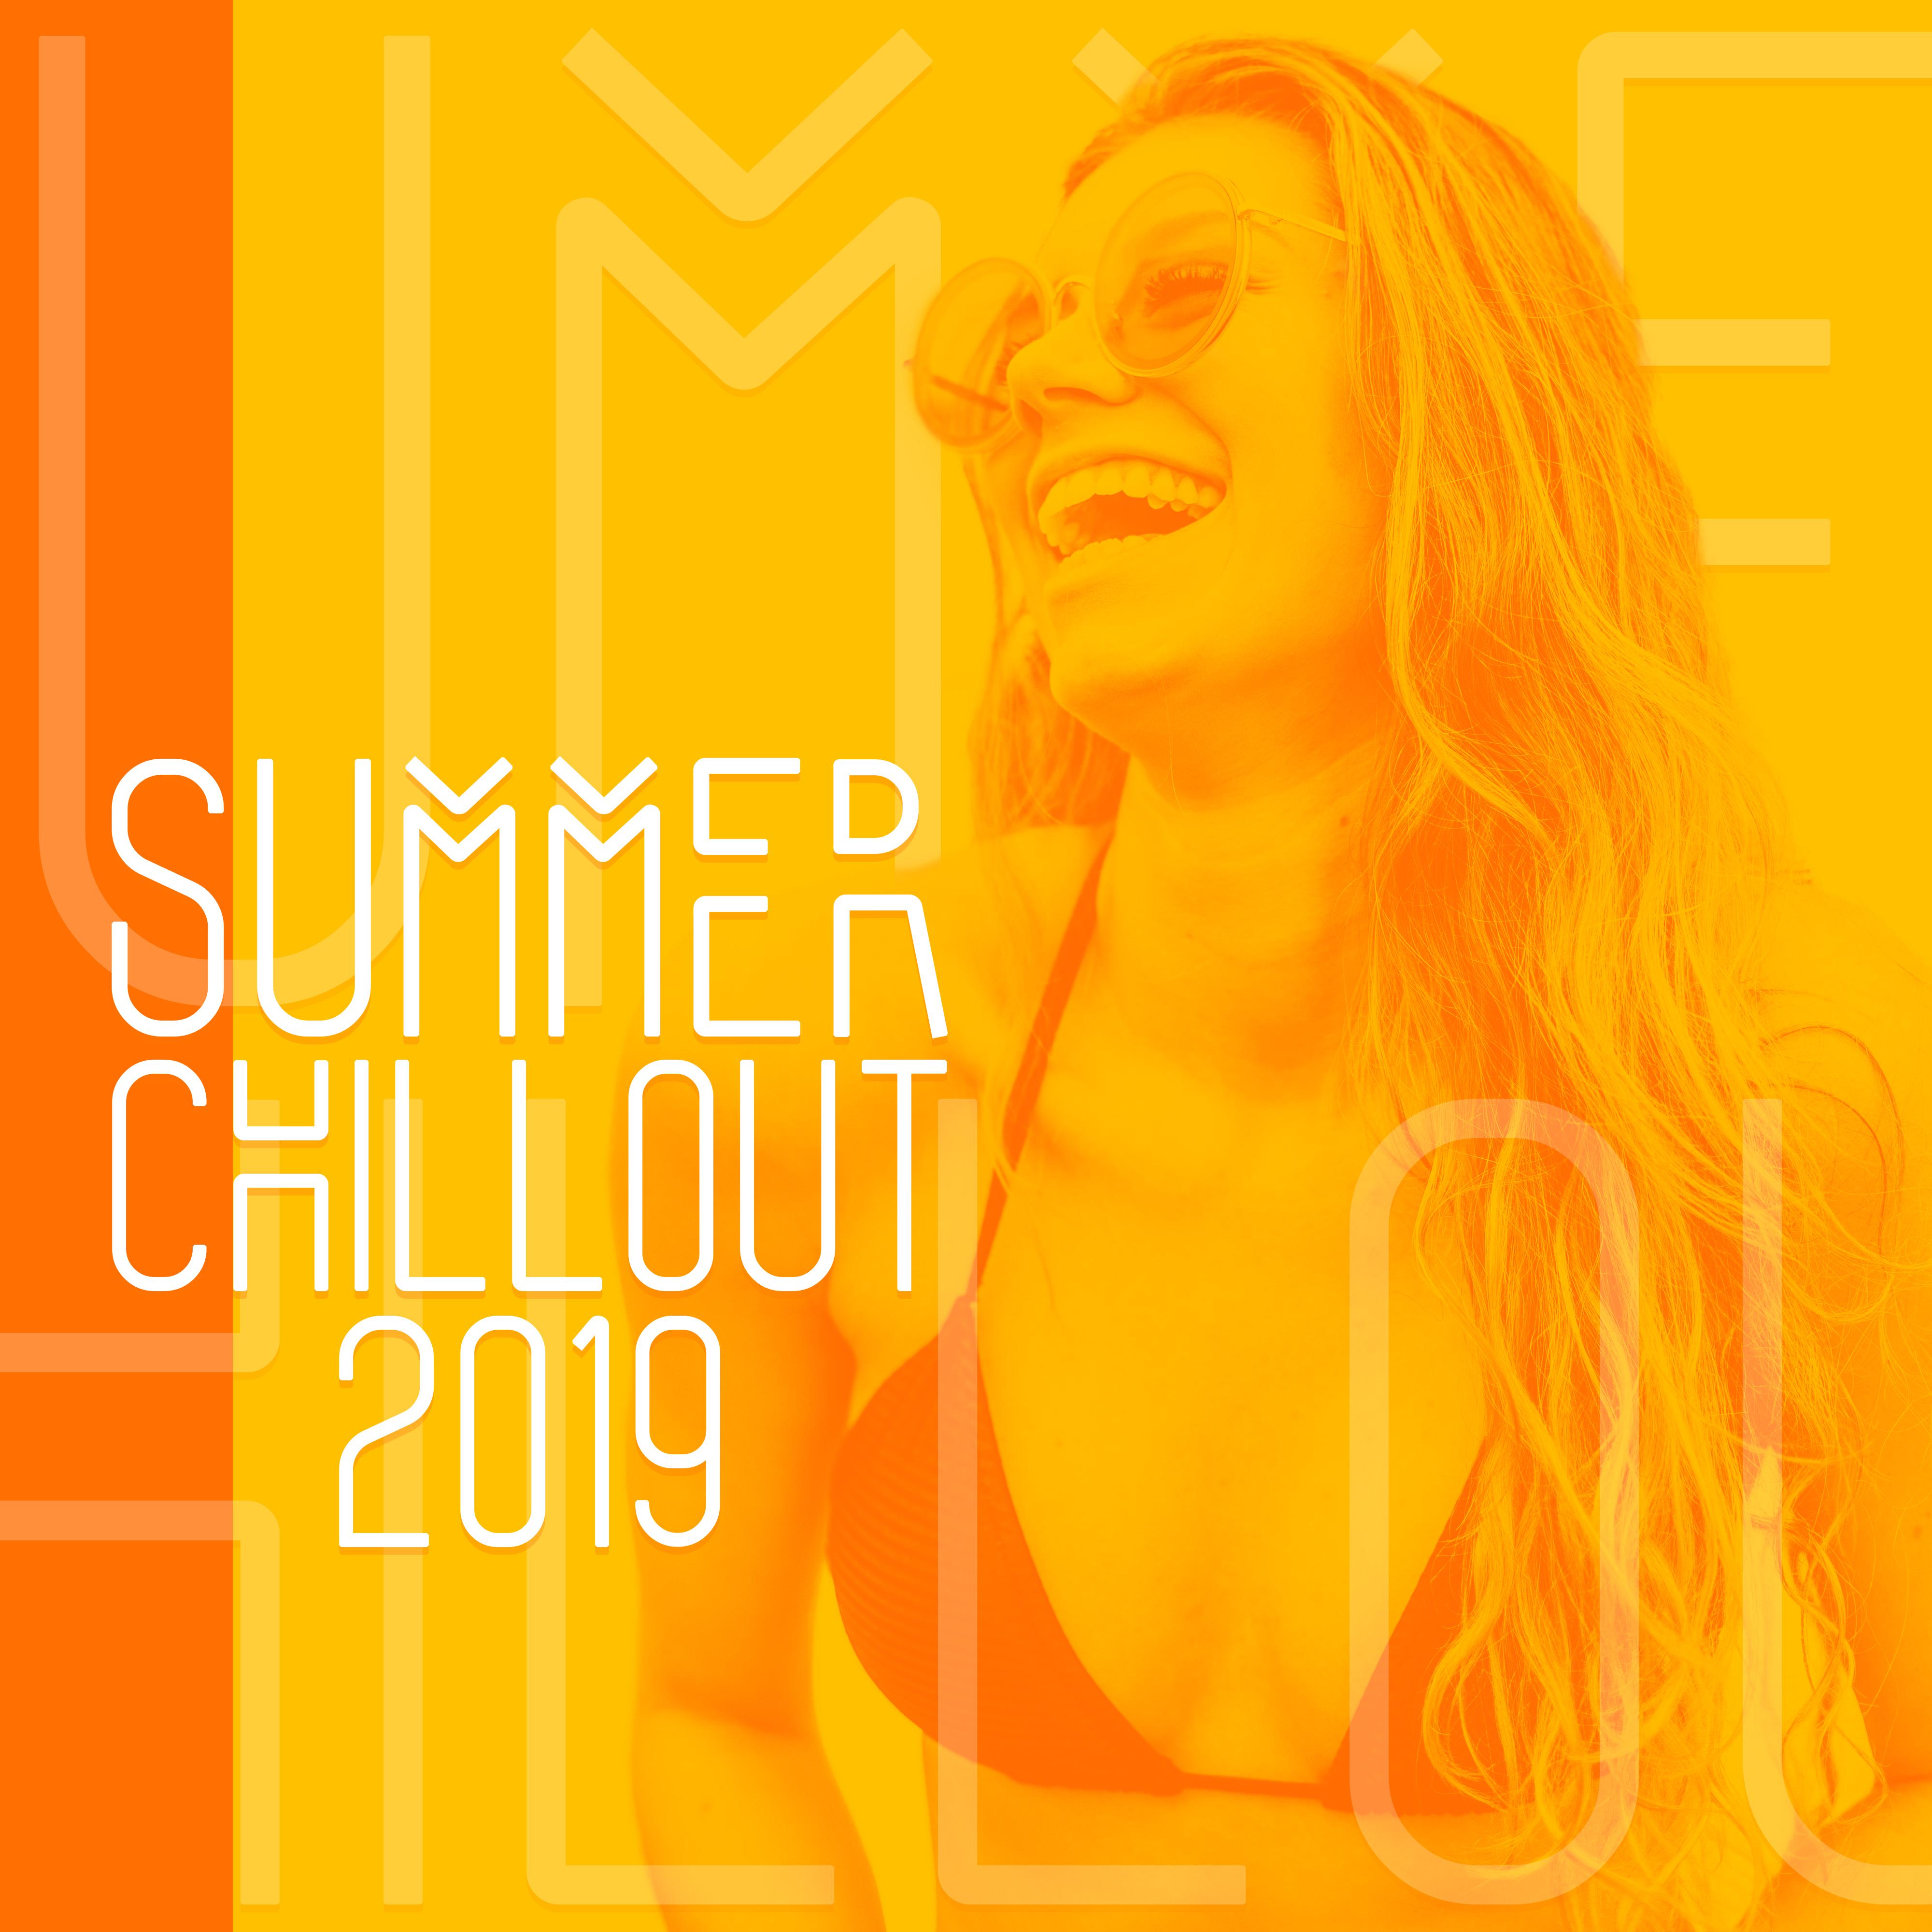 Summer Chillout 2019: Ibiza Lounge, Summer Collection 2019 for Relaxation, Rest, Poolside Bar, Ibiza Dance Party, Summer Music 2019